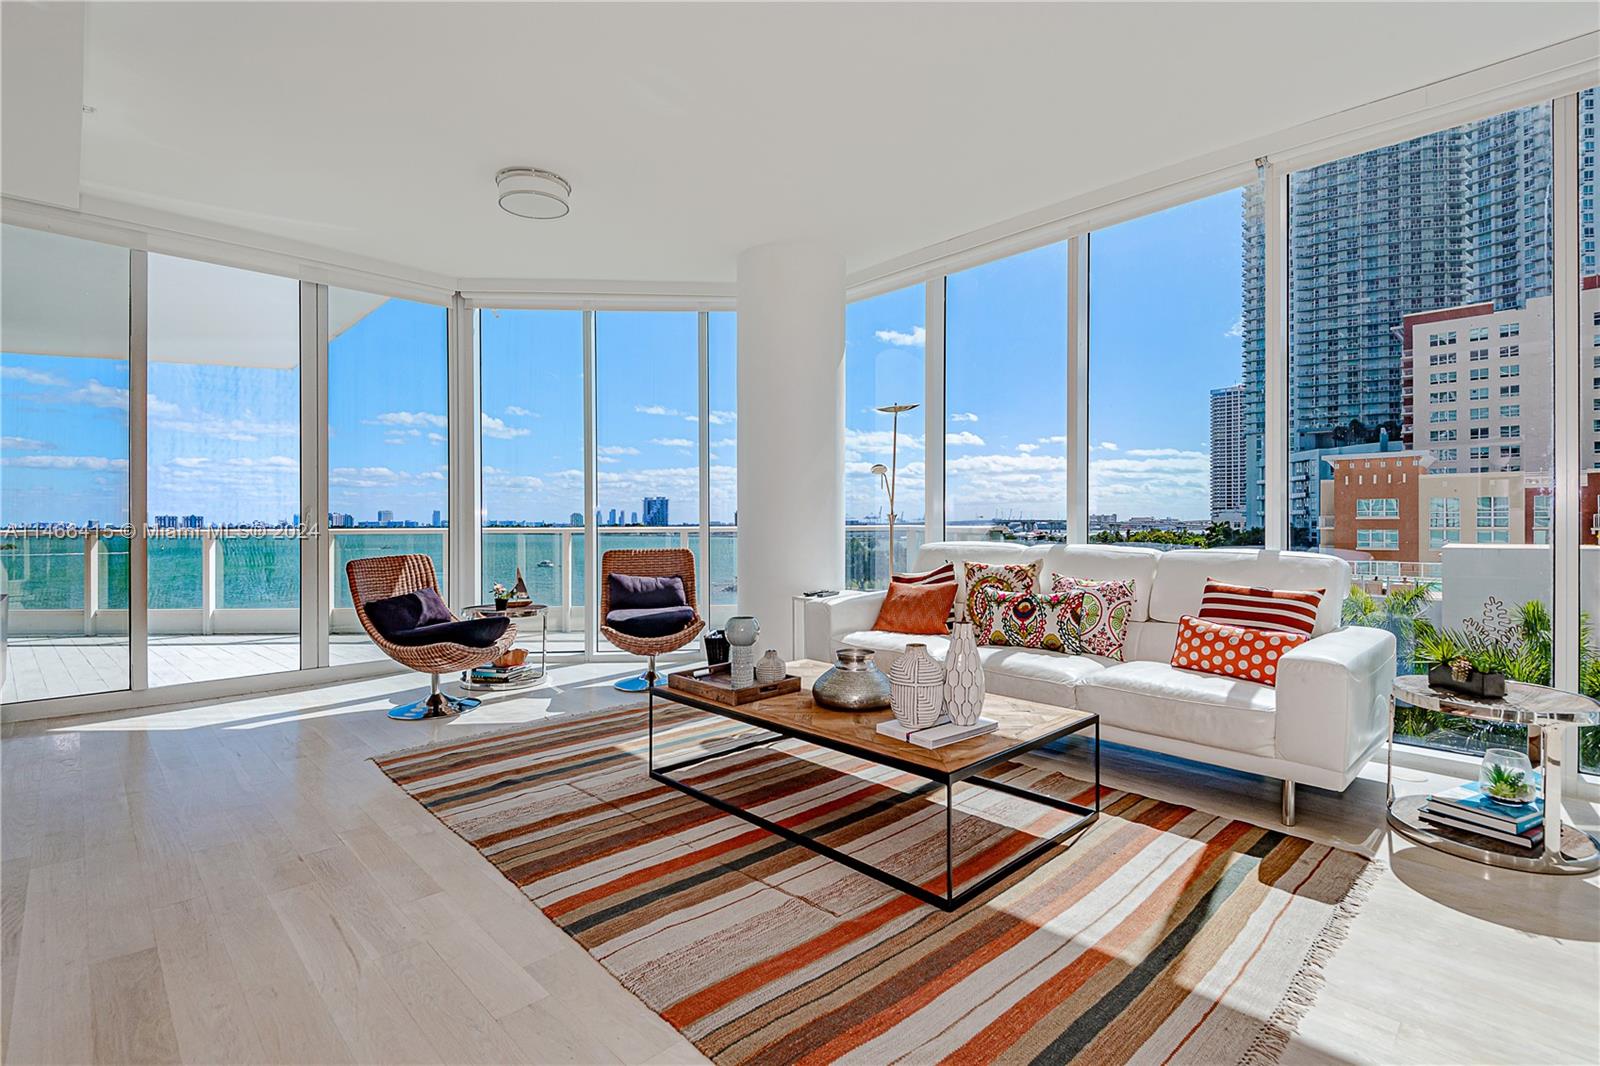 Beautiful 3 bedroom/3.5 bathroom unit with the best view that Biscayne Bay, 3 balconies, two direct elevators opening directly into the unit, solid wood floors and top of the line appliances. Amenities include: gym, spa, concierge, 2 pools with towel service and much more. Condo can be rented furnished or unfurnished.